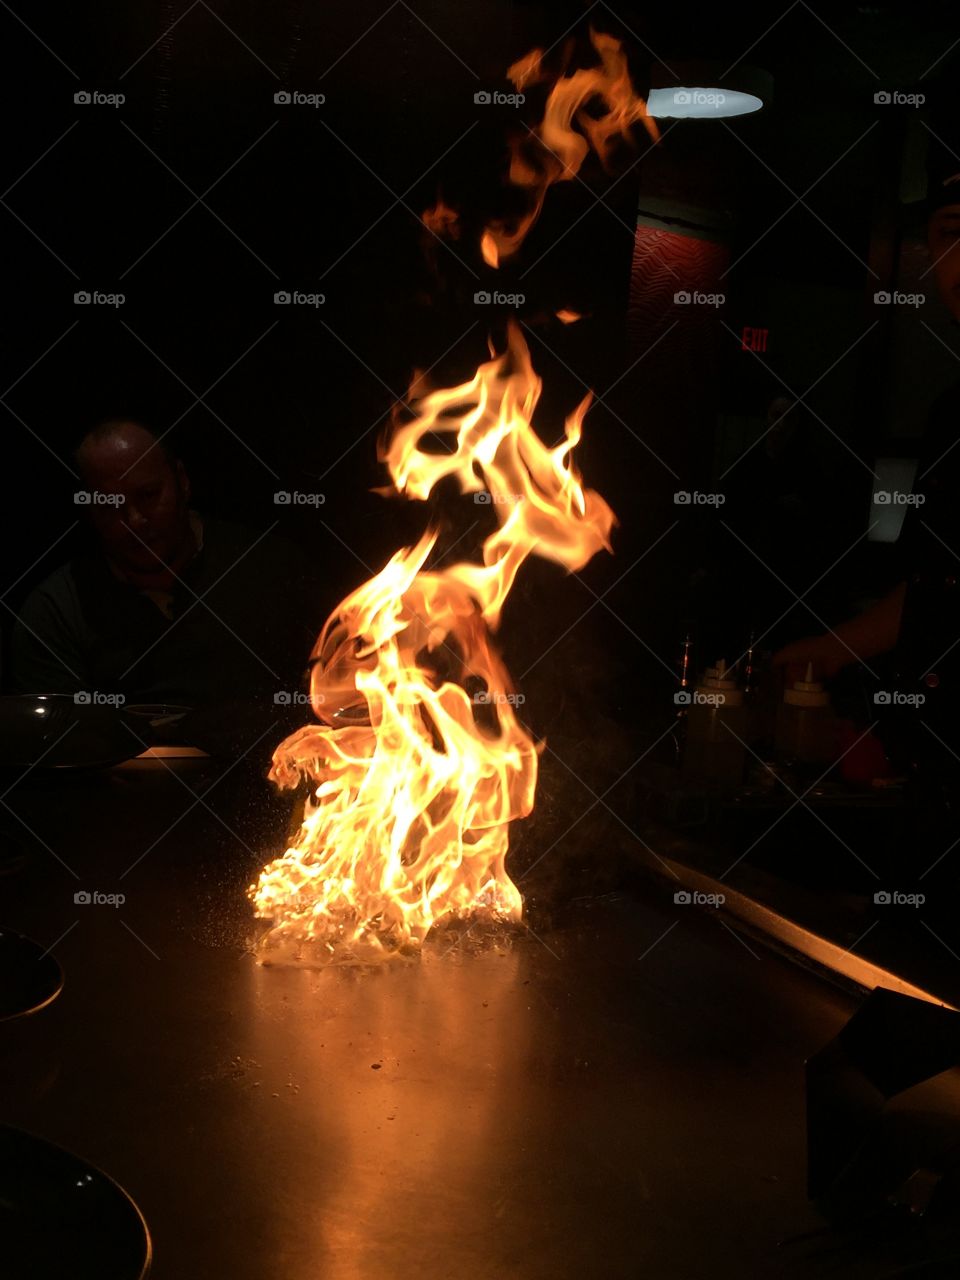 This is a picture of fire taken at a restaurant where the chef cooked our food right in front of us.